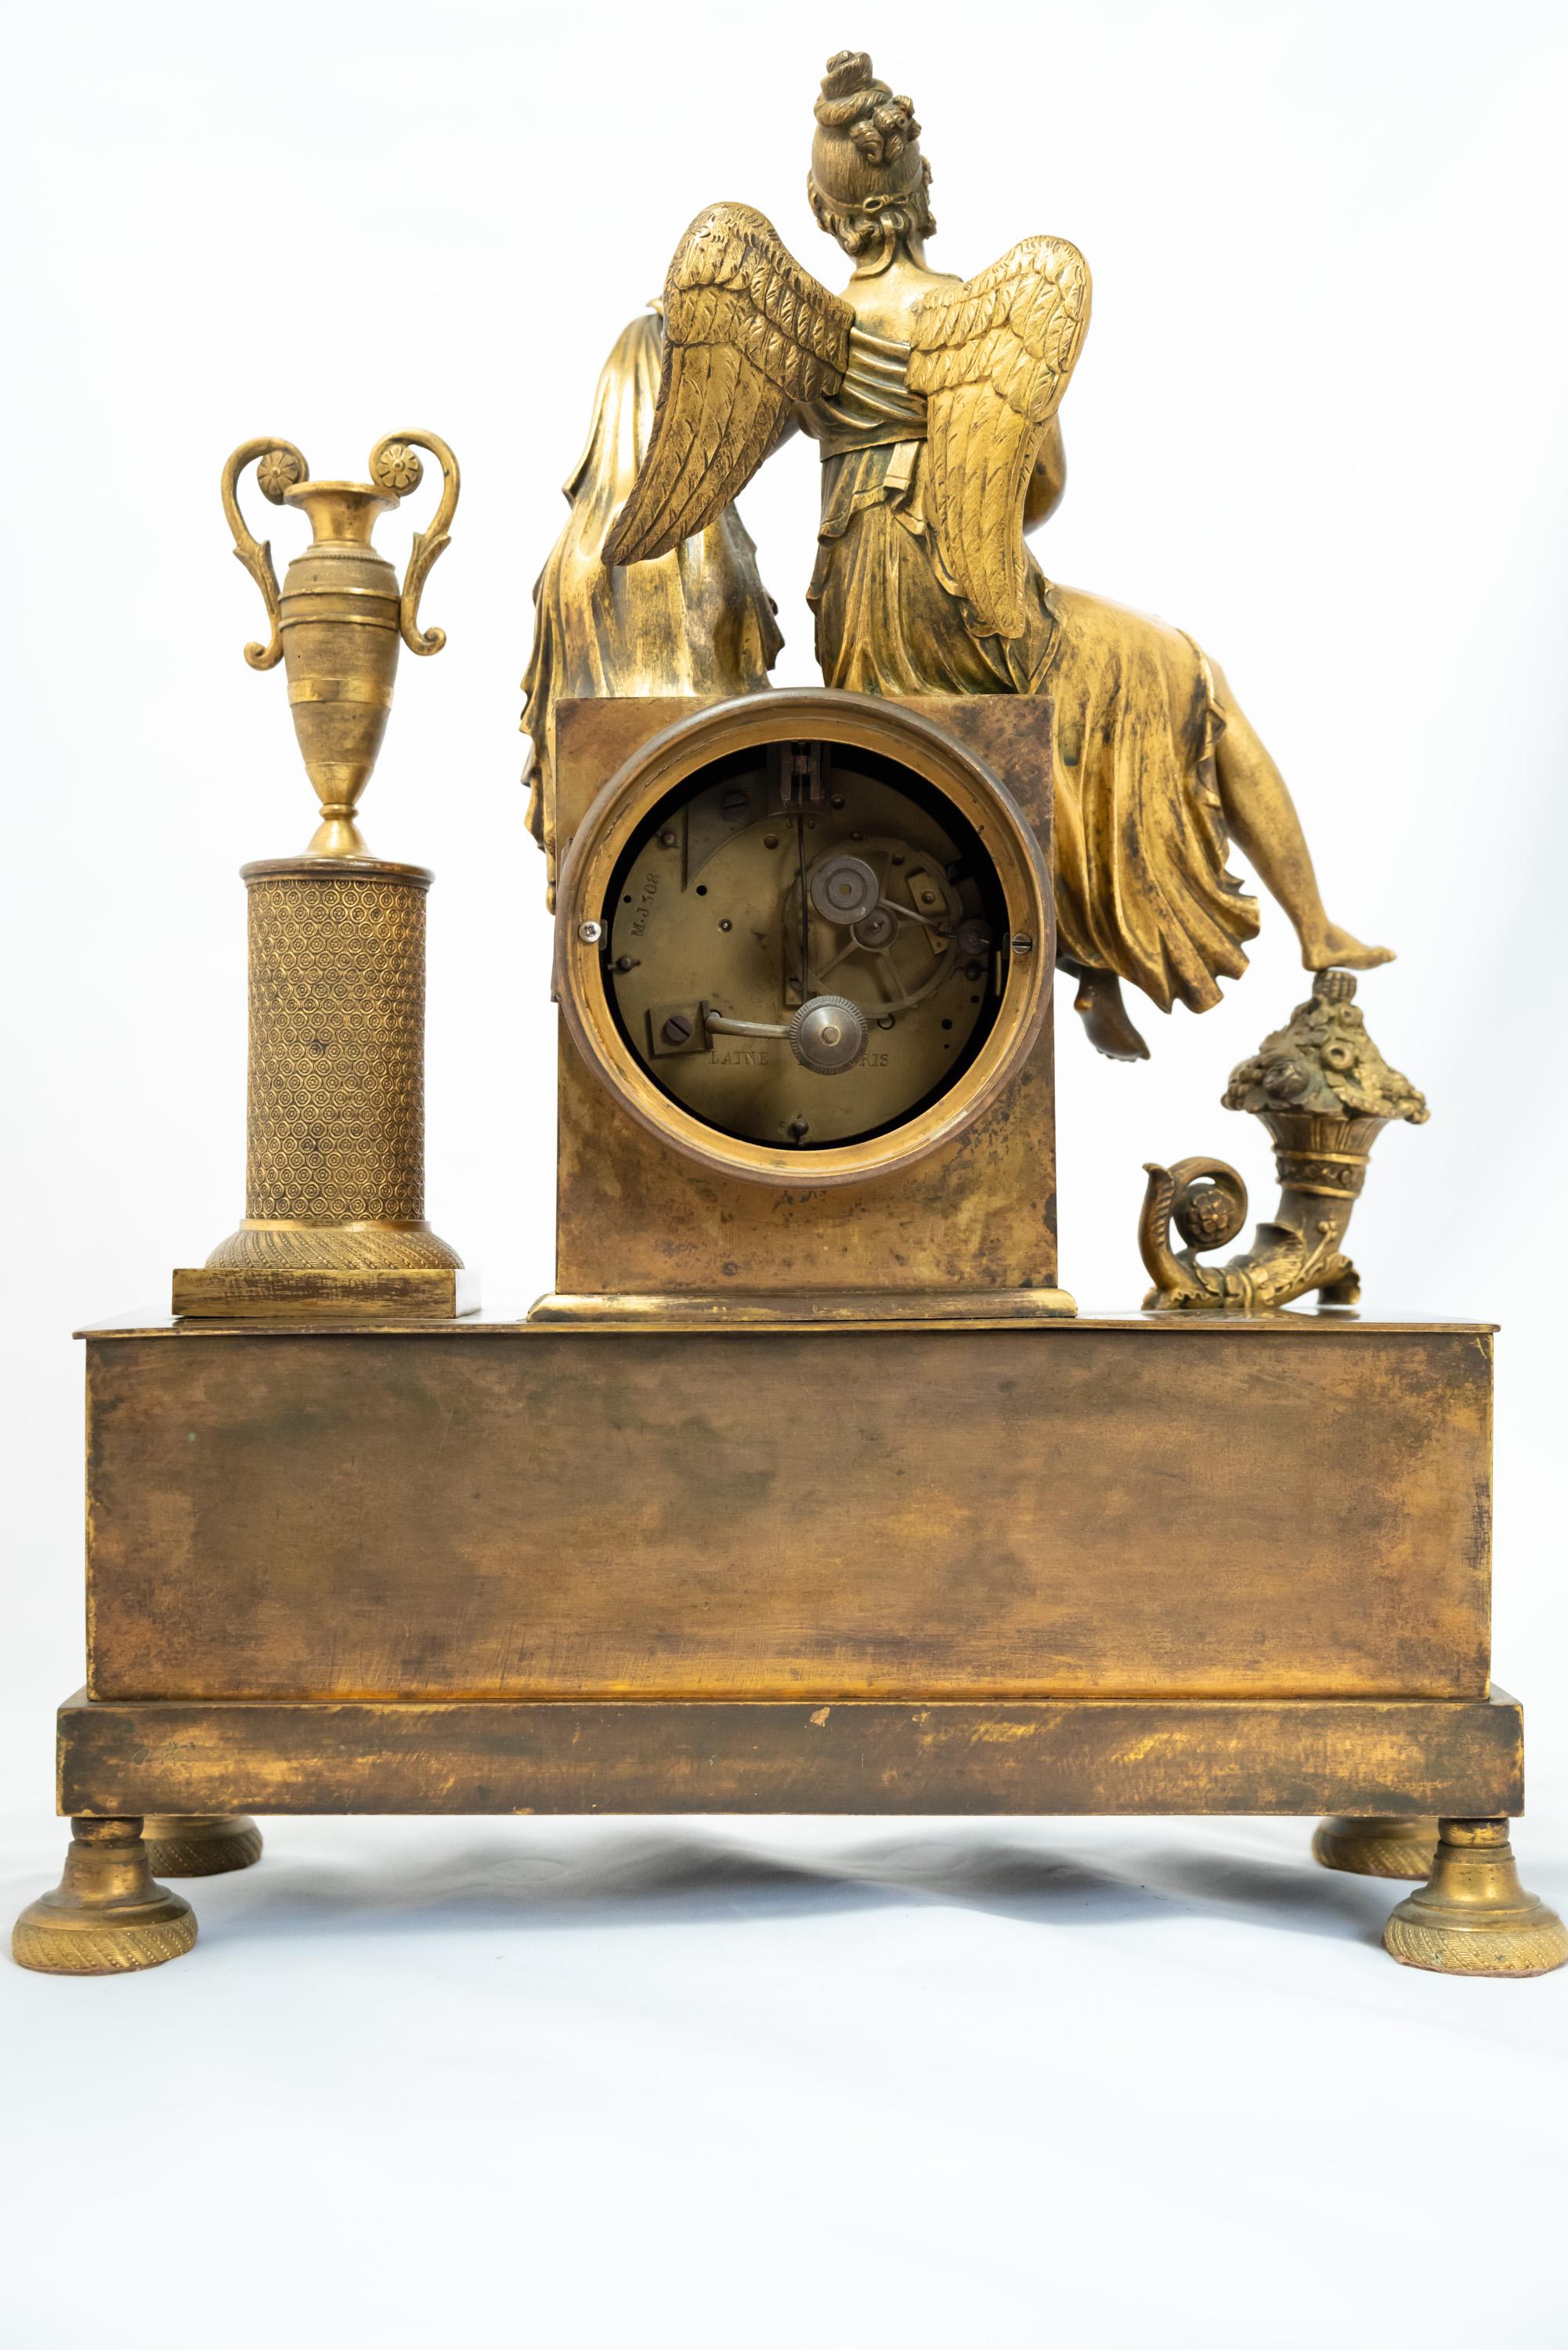 19th Century Seated Female Figure in French Fire-Gilt Clock from Empire Era For Sale